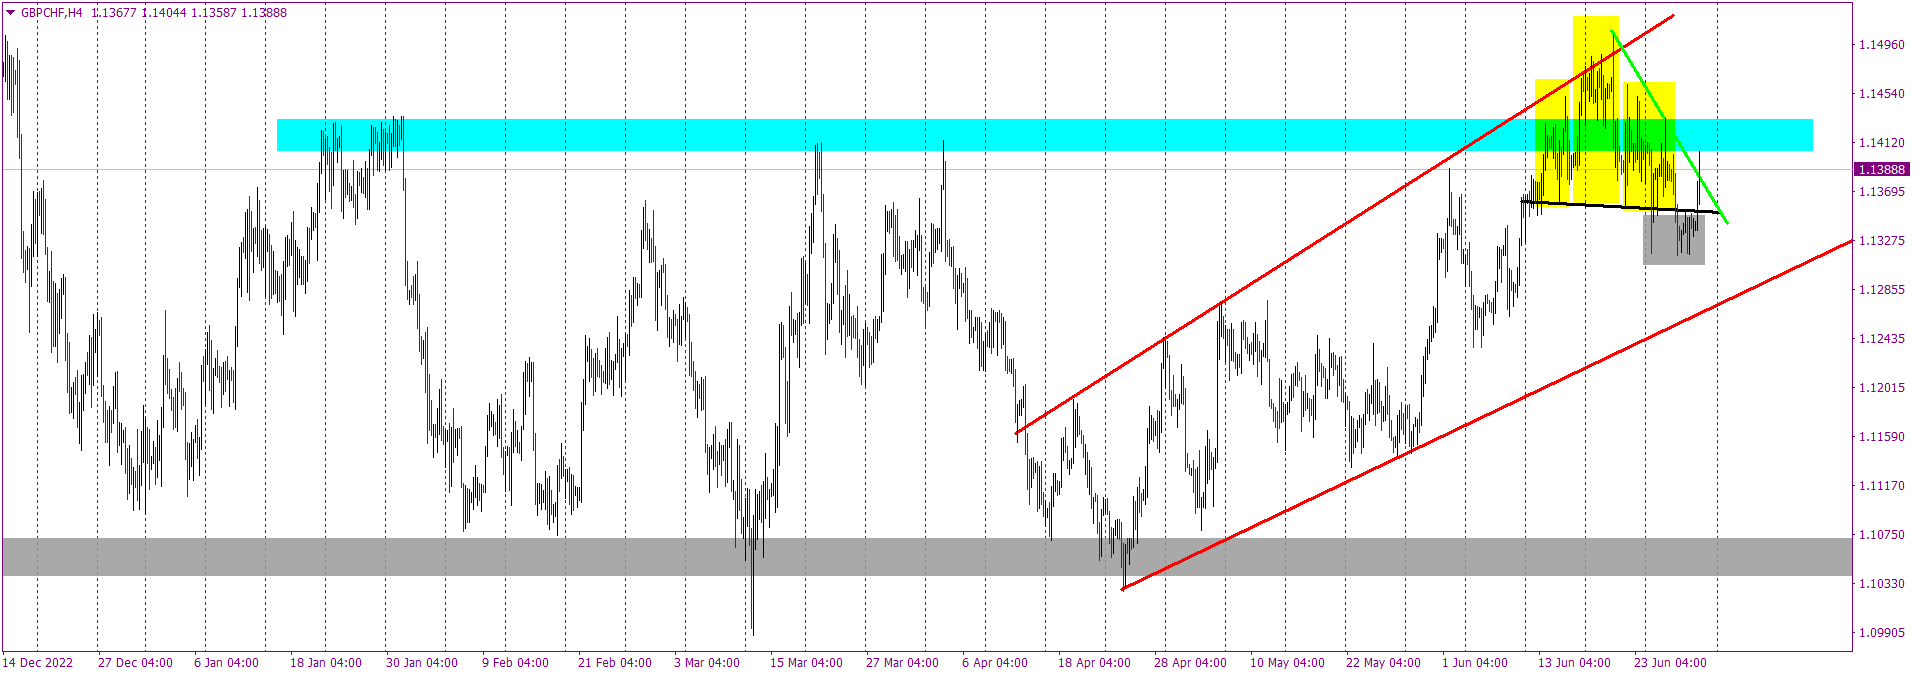 GBPCHF: False Breakout Sparks Potential for a Resurgence Above Resistance